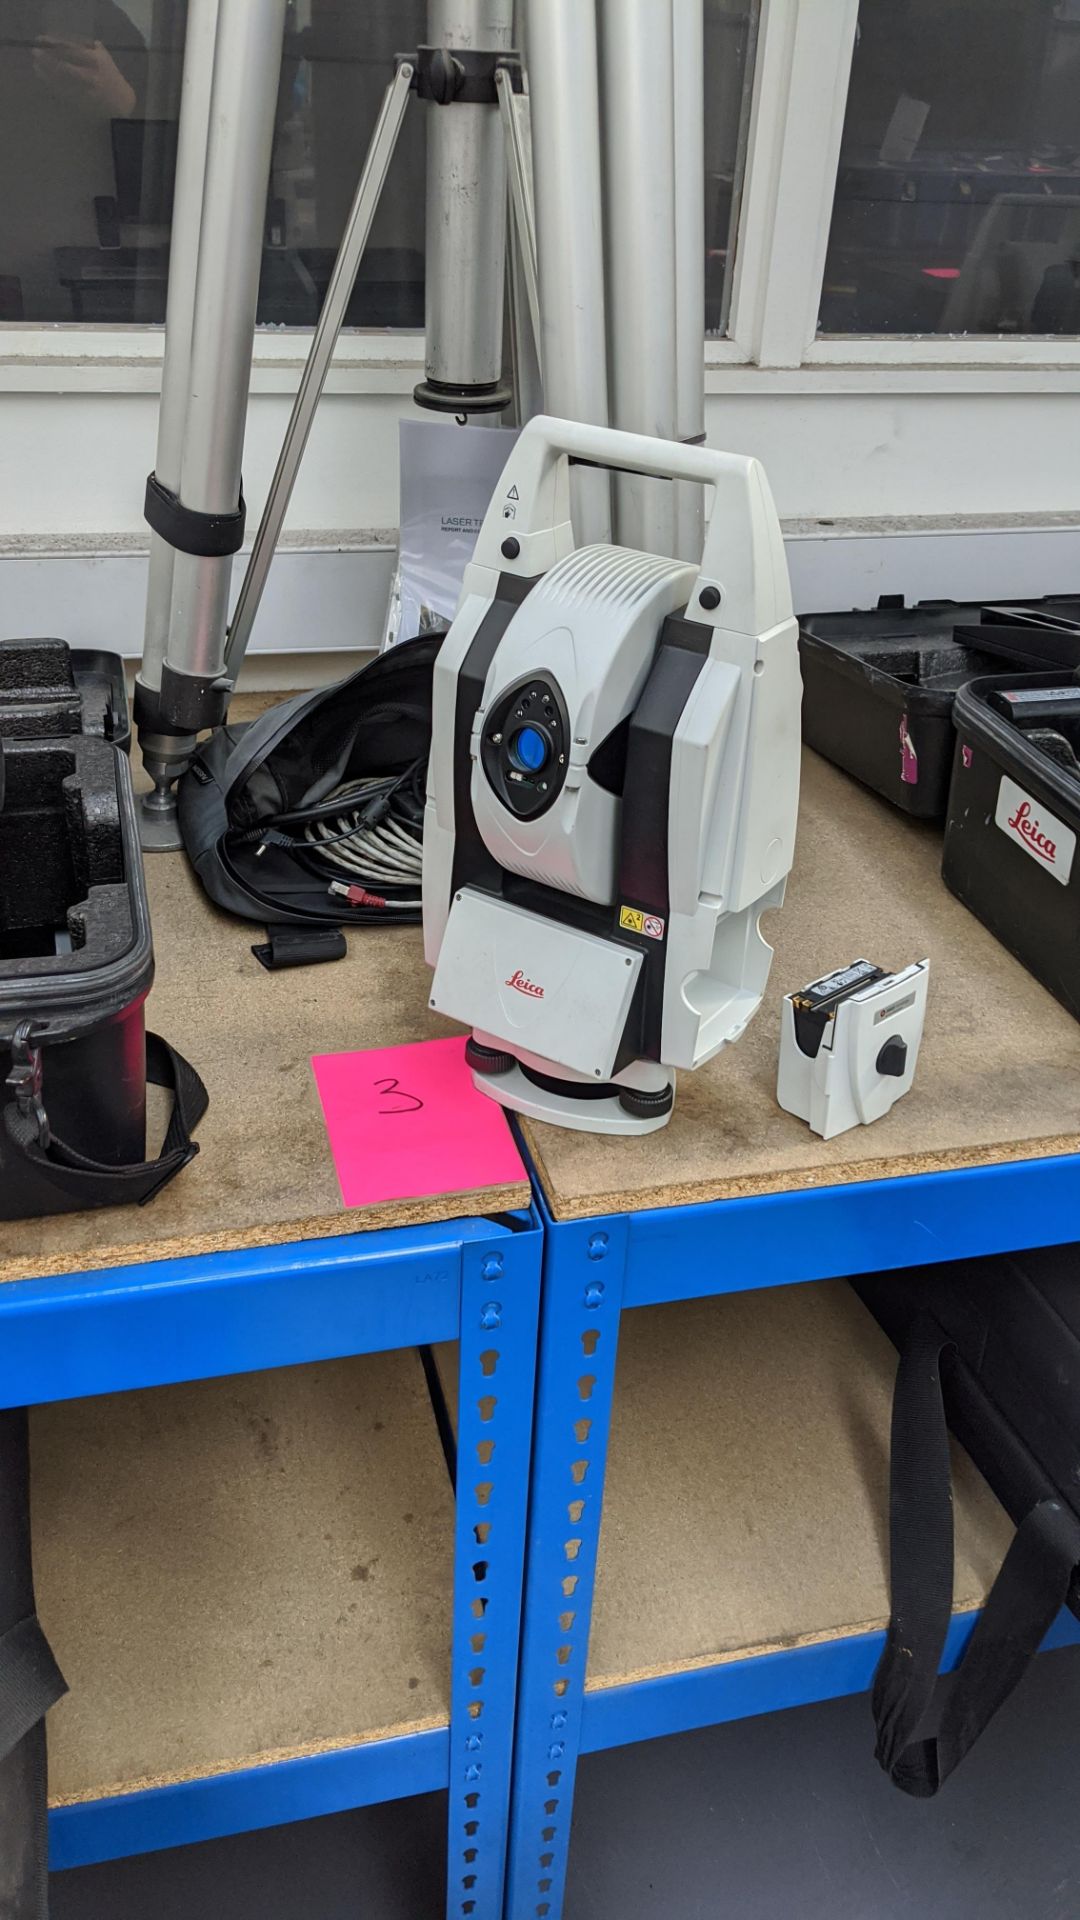 Leica Absolute laser tracker, model AT402, serial no. 392314. Next calibration date due on 12.06.20. - Image 6 of 17